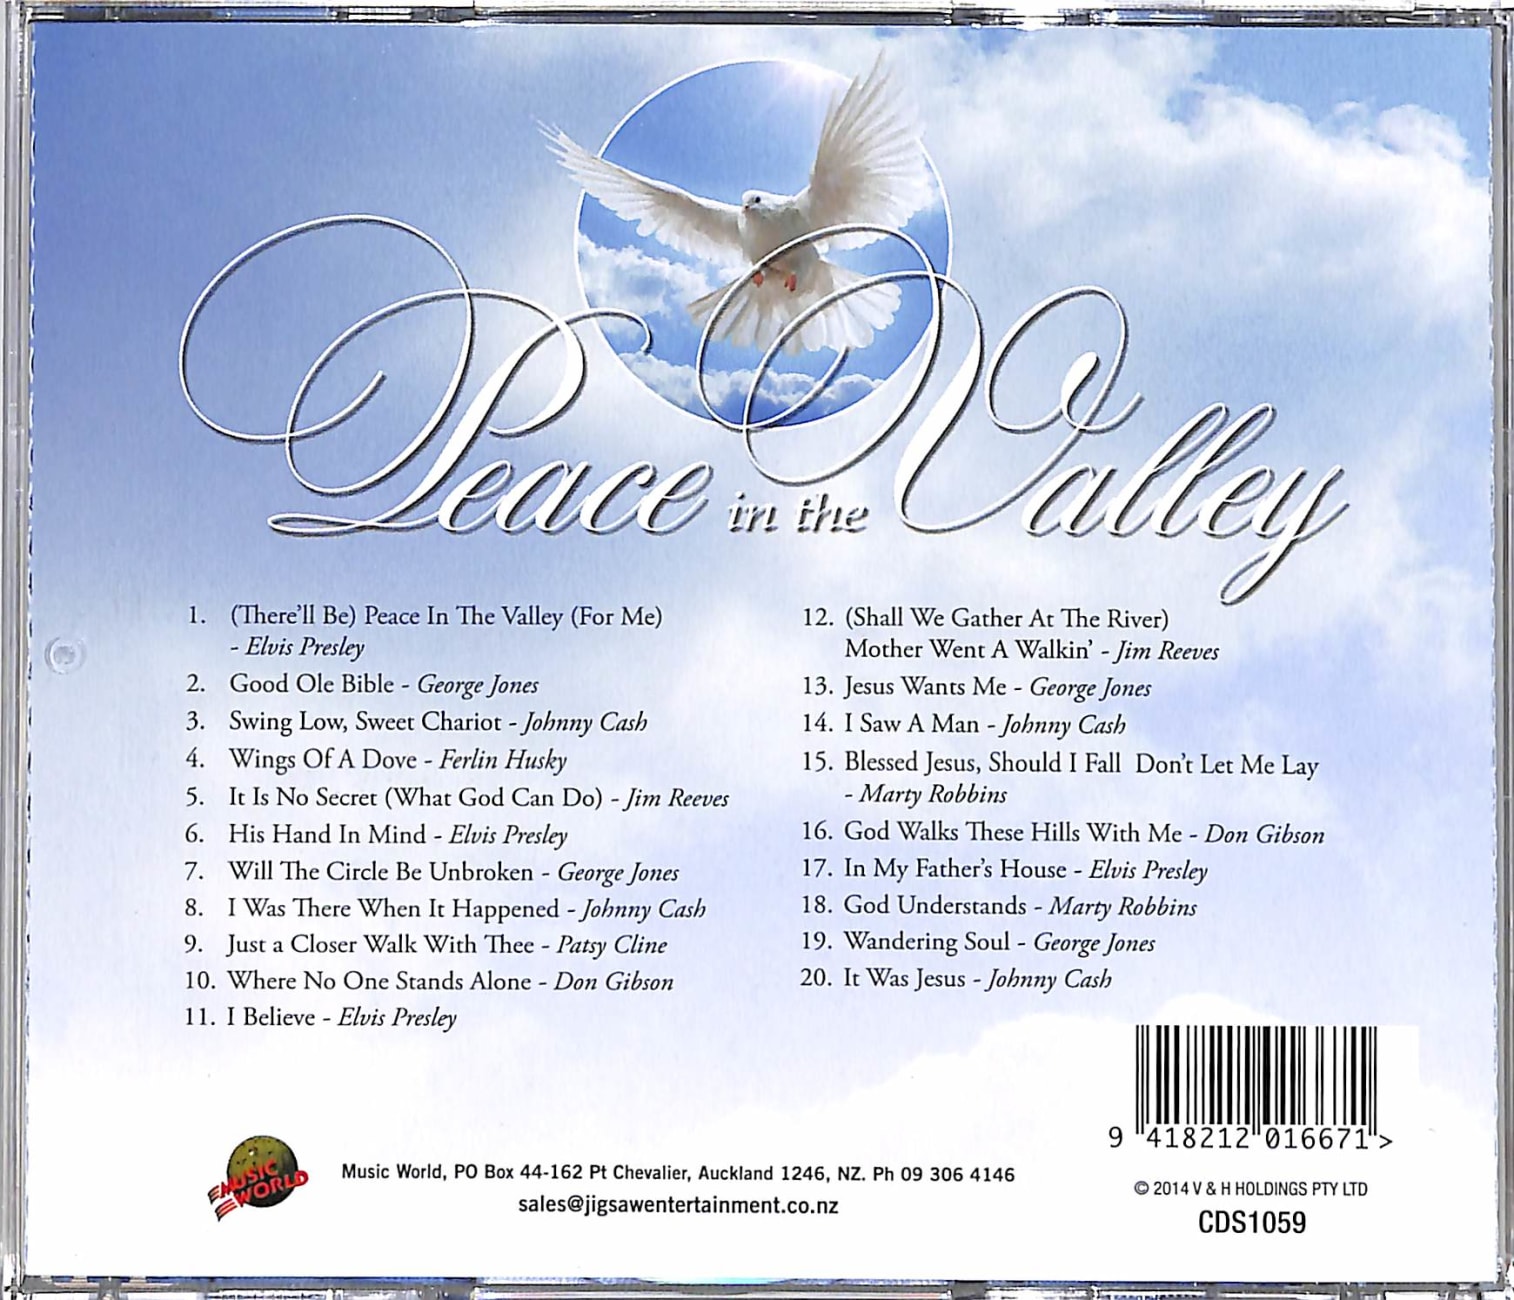 Peace in the Valley CD